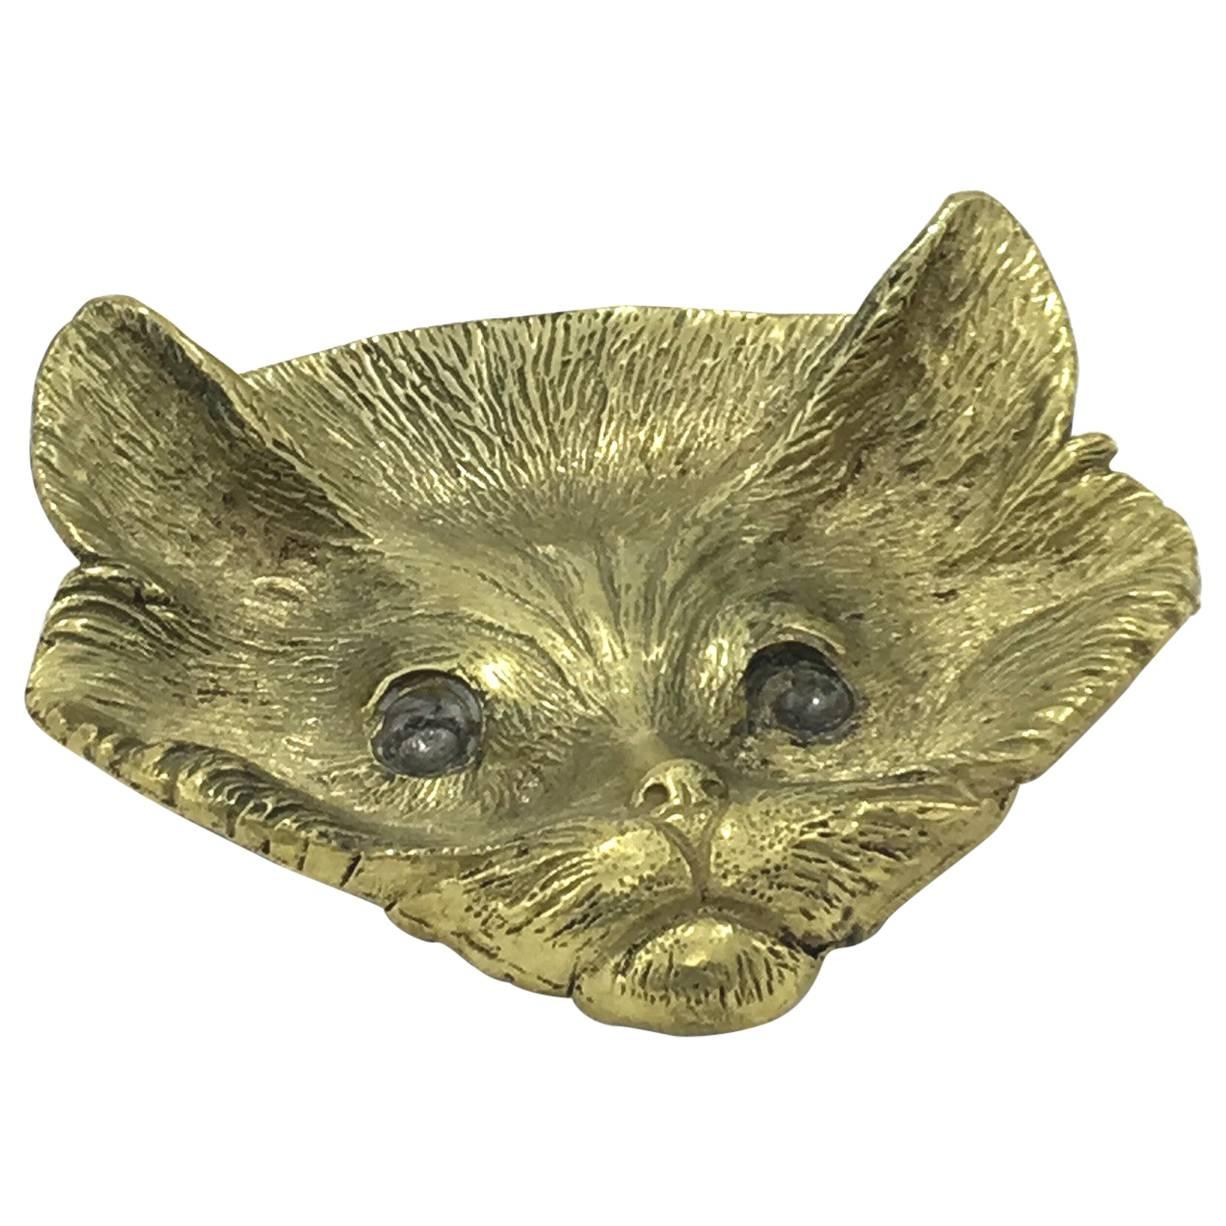 Cat Brass Ashtray or Bowl